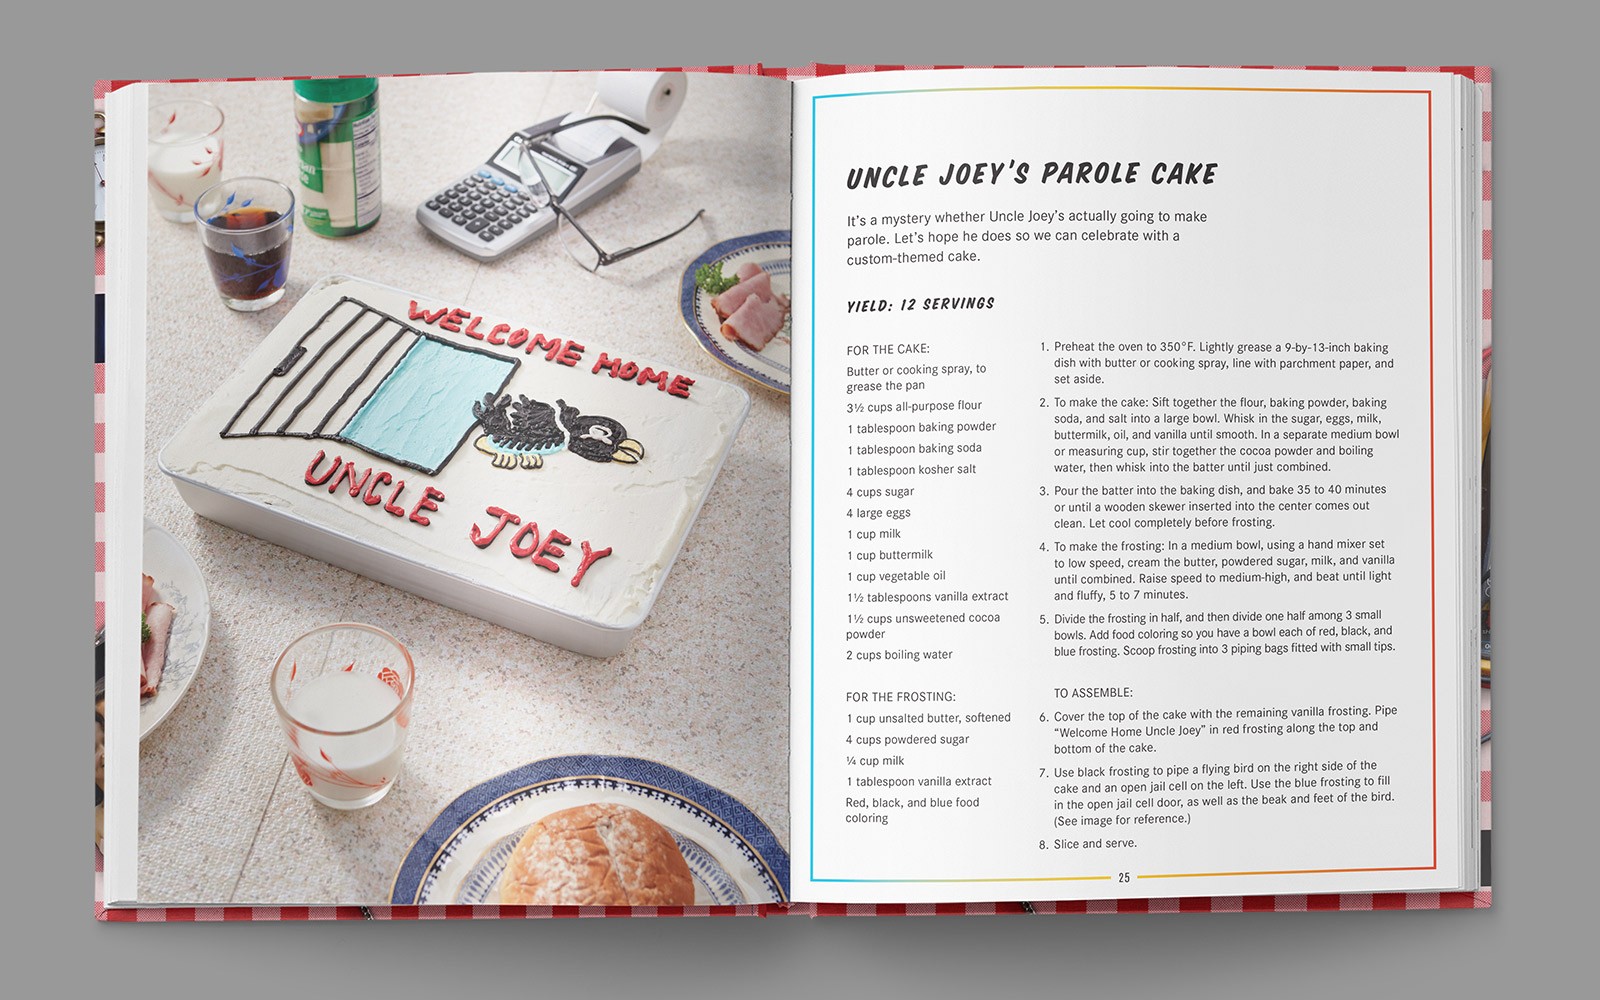 Back to the Future: The Official Hill Valley Cookbook (Prototype Shown) View 4